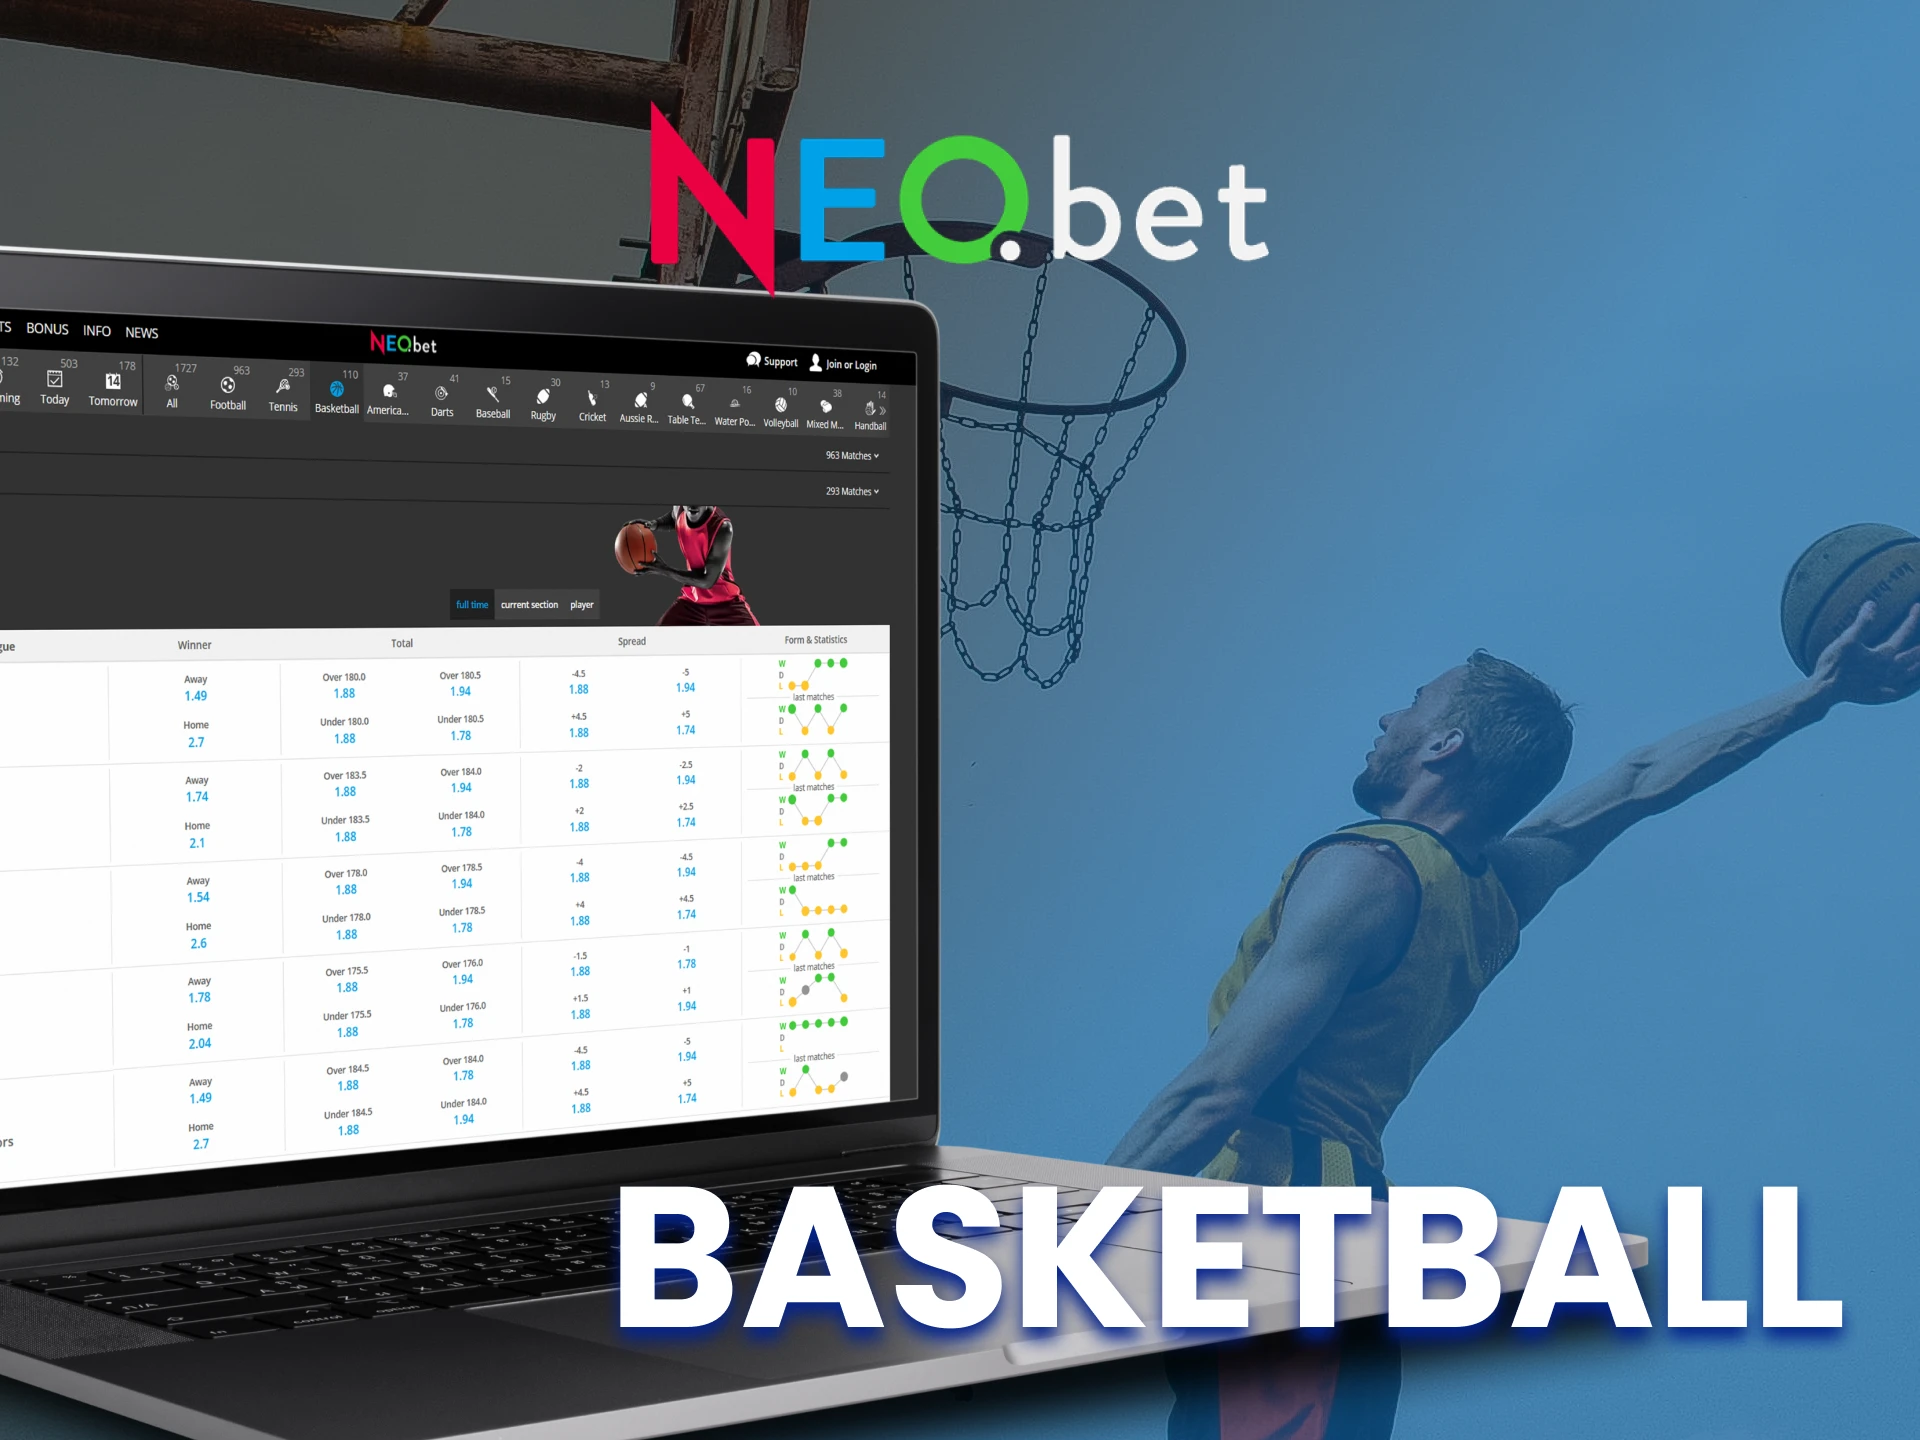 Bet on basketball with NEO.bet.